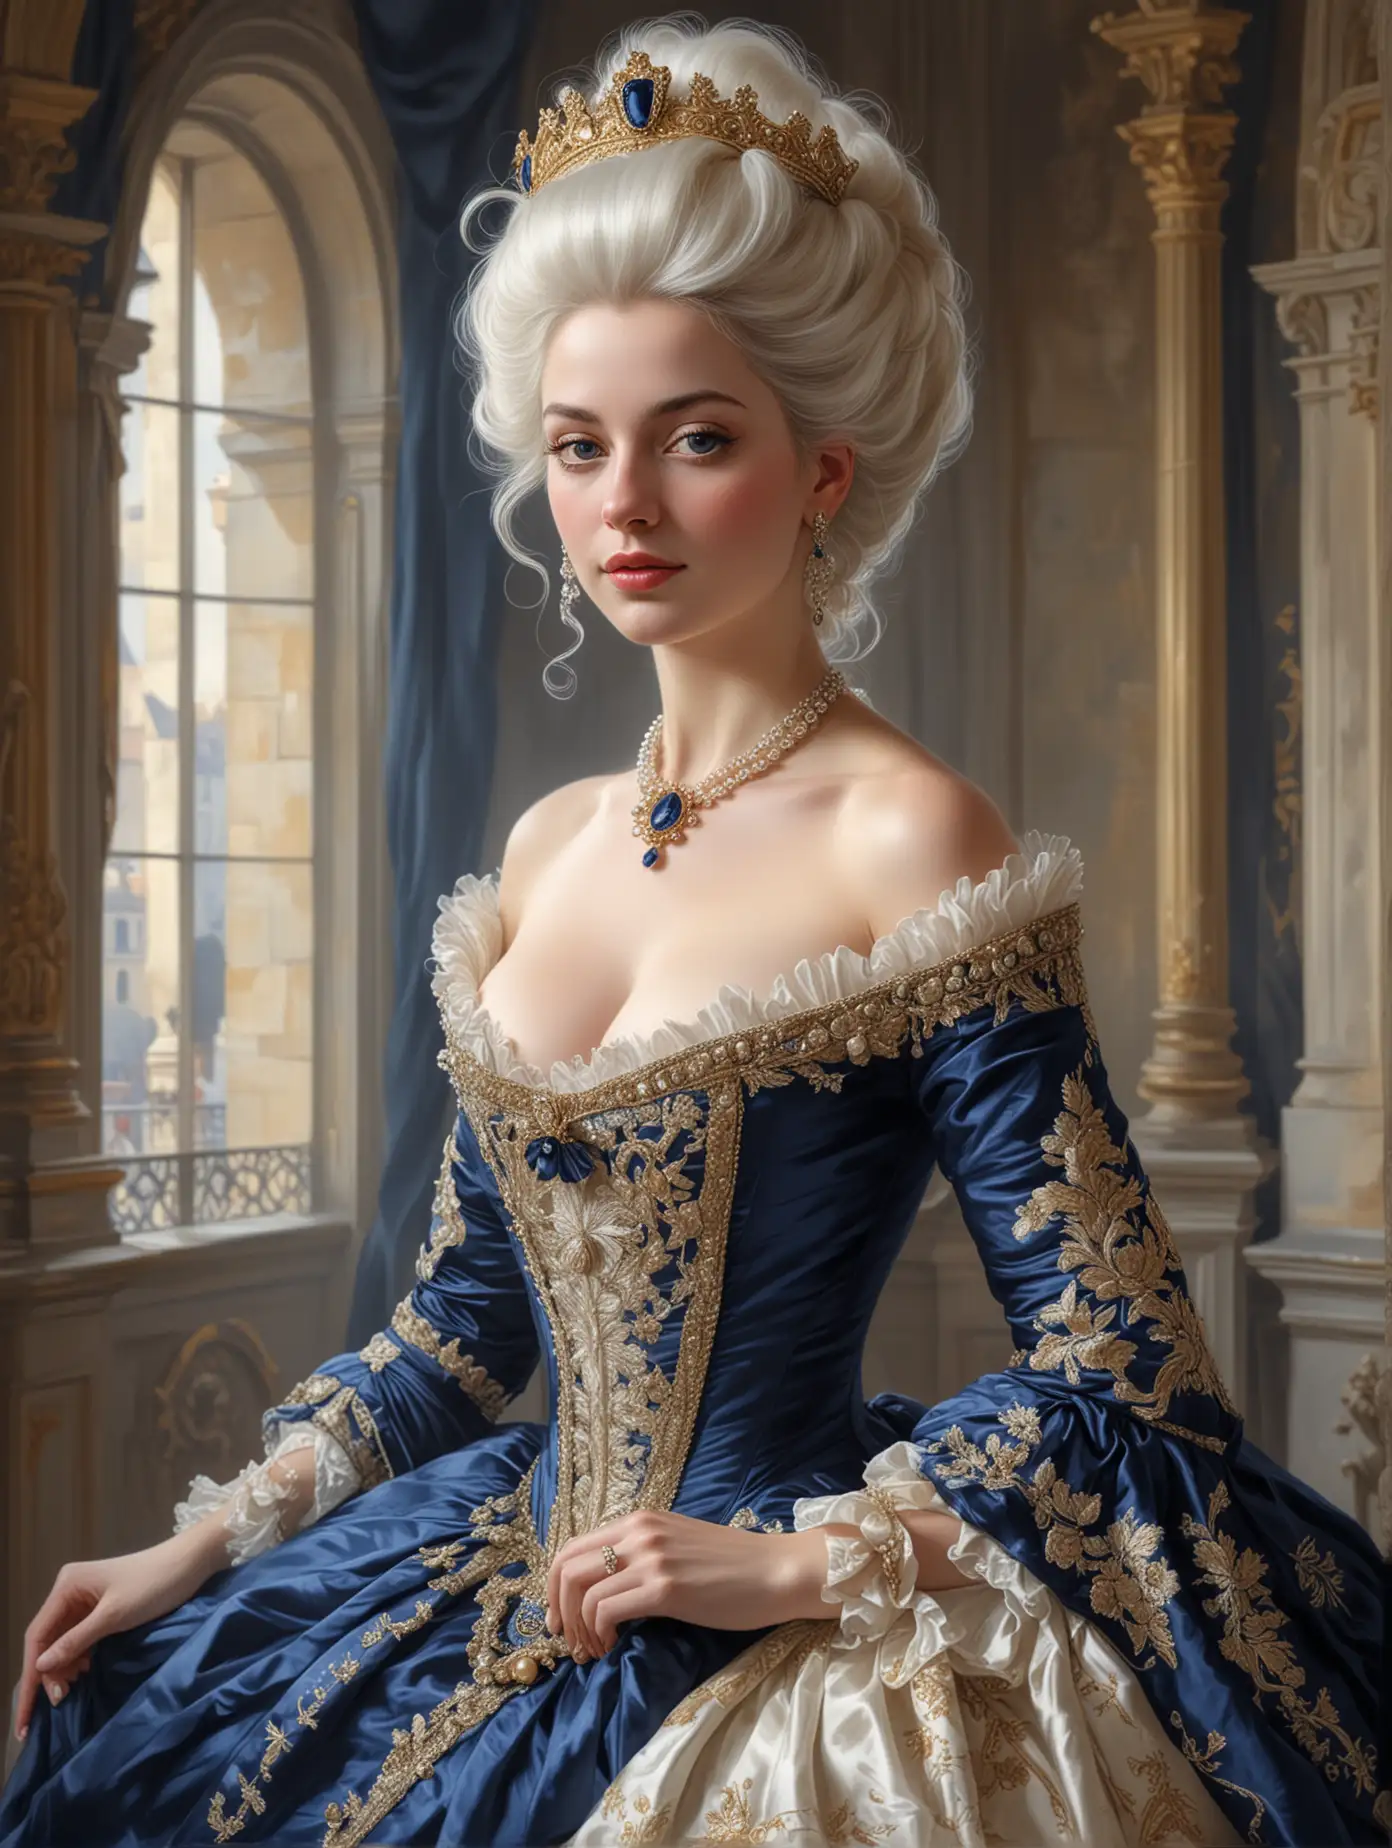 Illustration of a beautiful and voluptuous queen of France, in the style of Marie Antoinette, with white hair, she's wearing a glamorous navy blue and gold regal gown, she is inside the castle